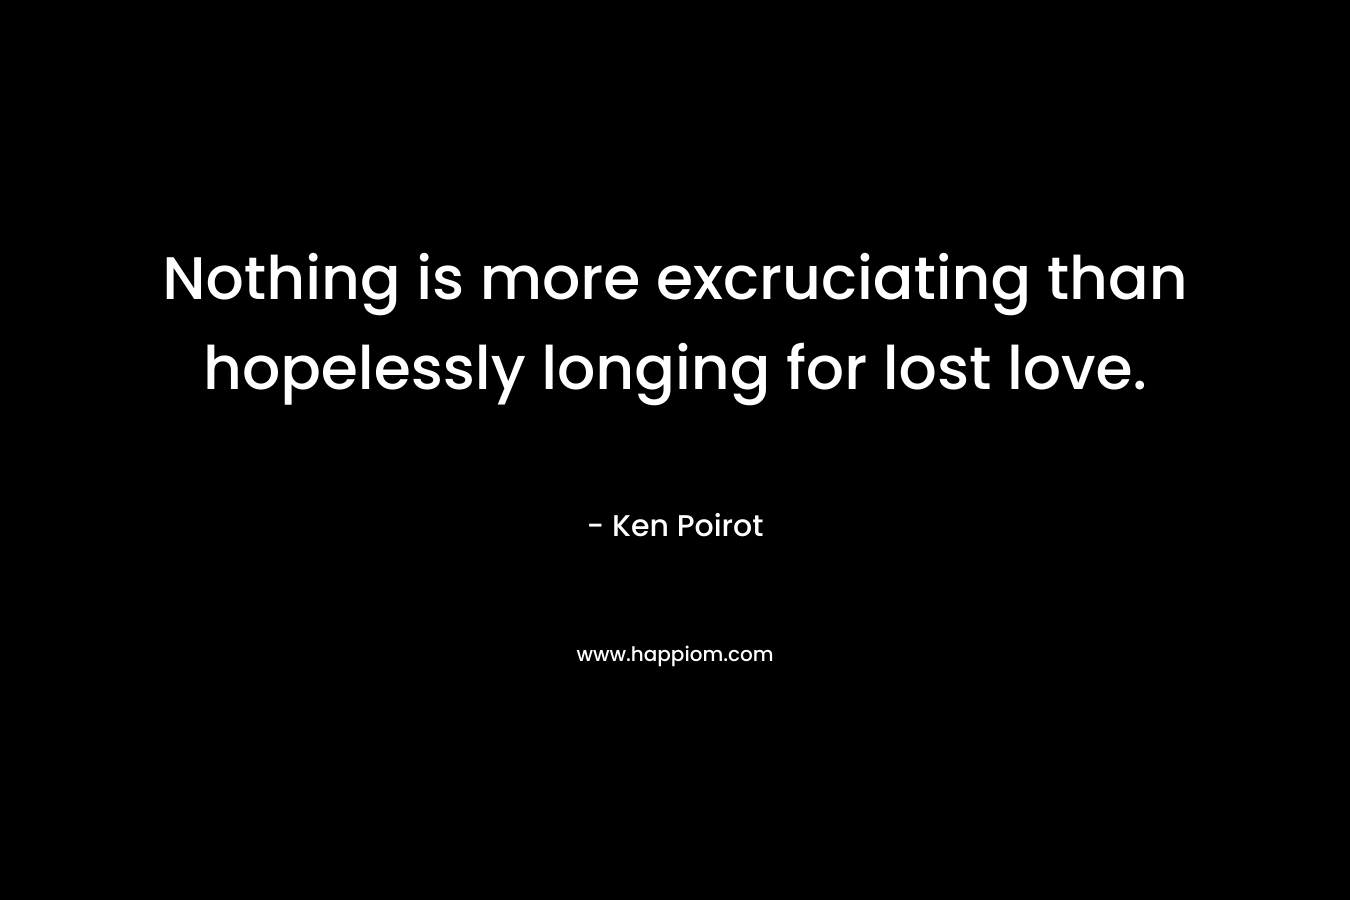 Nothing is more excruciating than hopelessly longing for lost love. – Ken Poirot